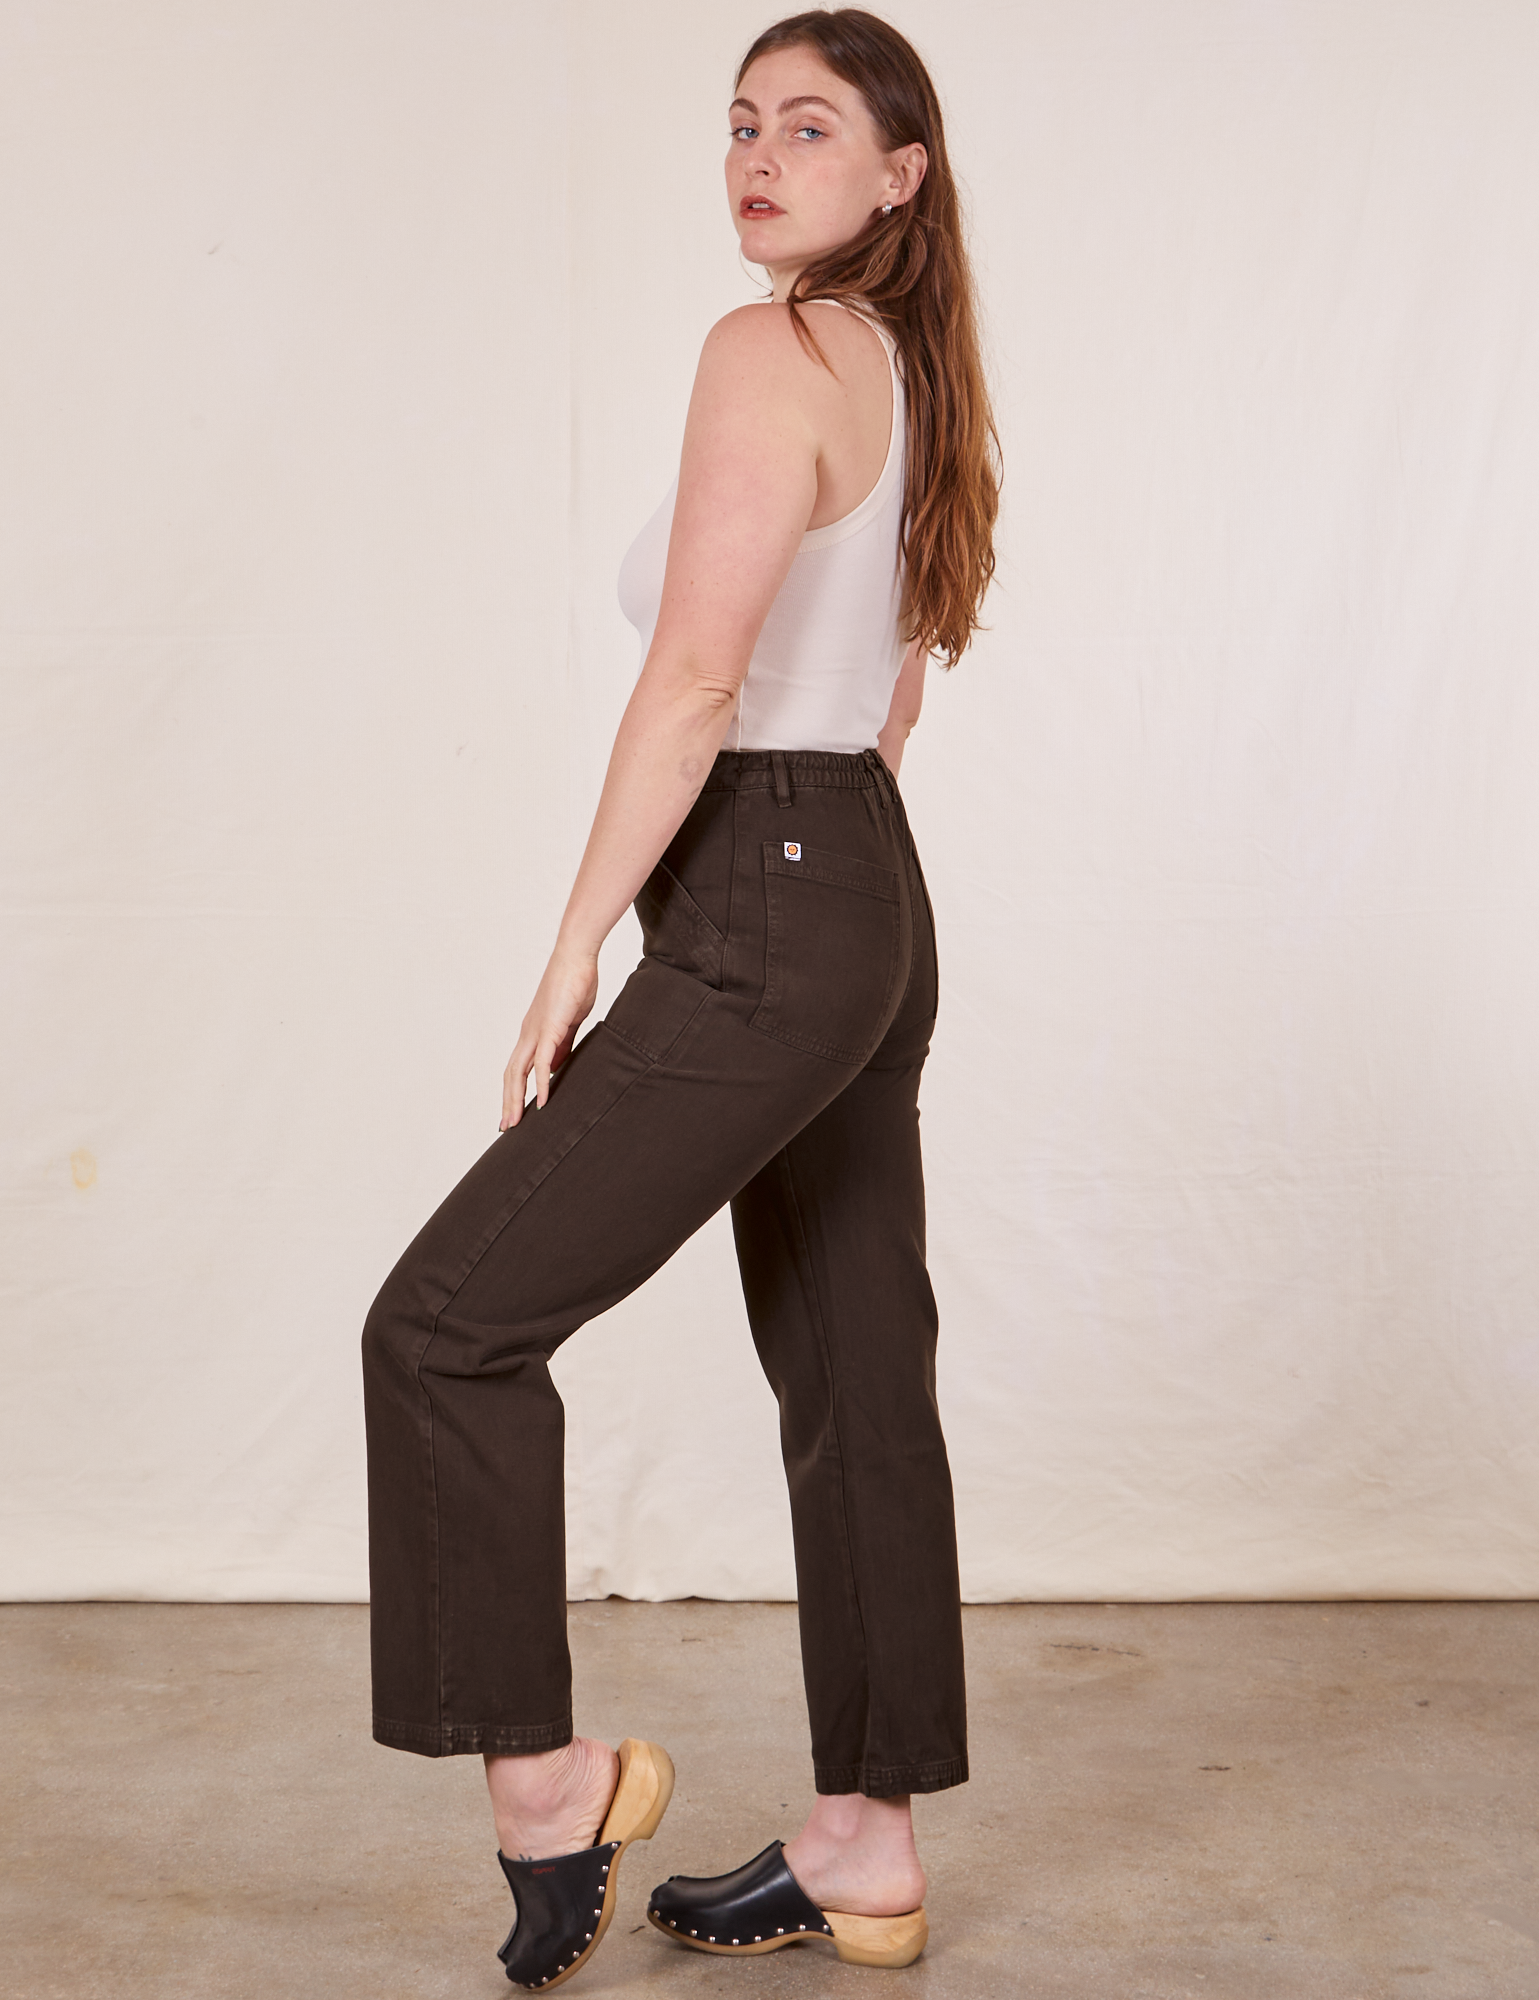 Work Pants in Espresso Brown side view on Allison wearing a Tank Top in vintage tee off-white